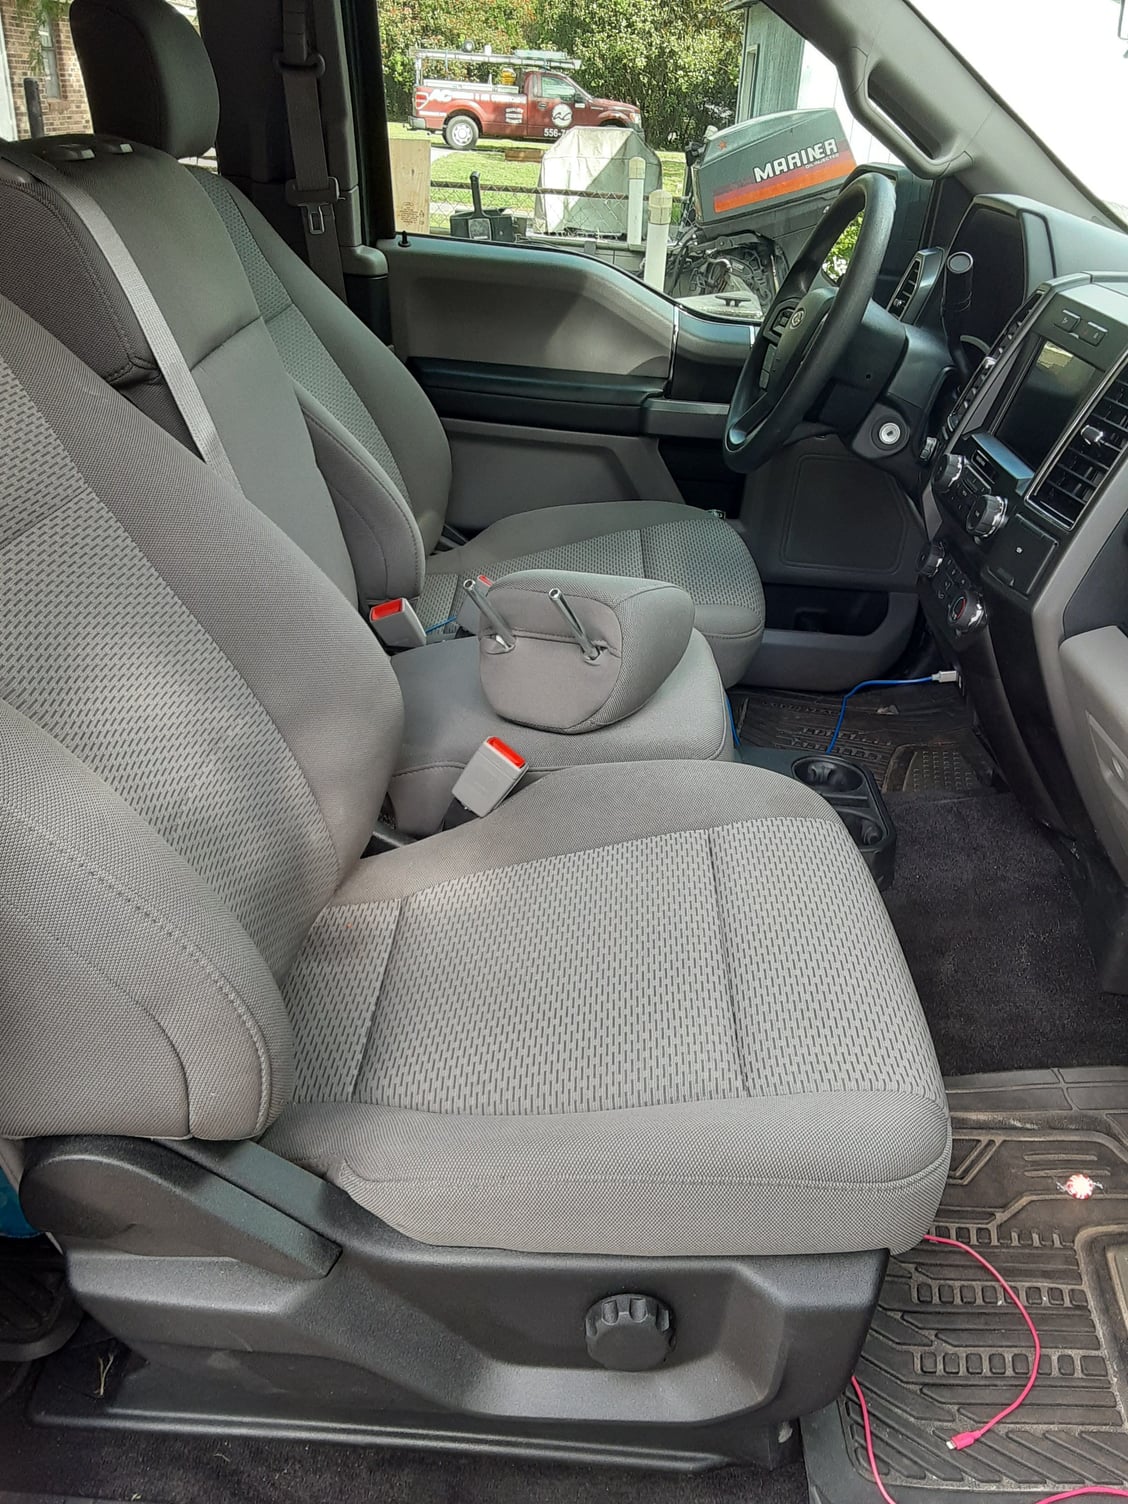 2018 F-150 STX Center console swap. - Page 3 - Ford F150 Forum 2018 Ford F150 Center Console Swap